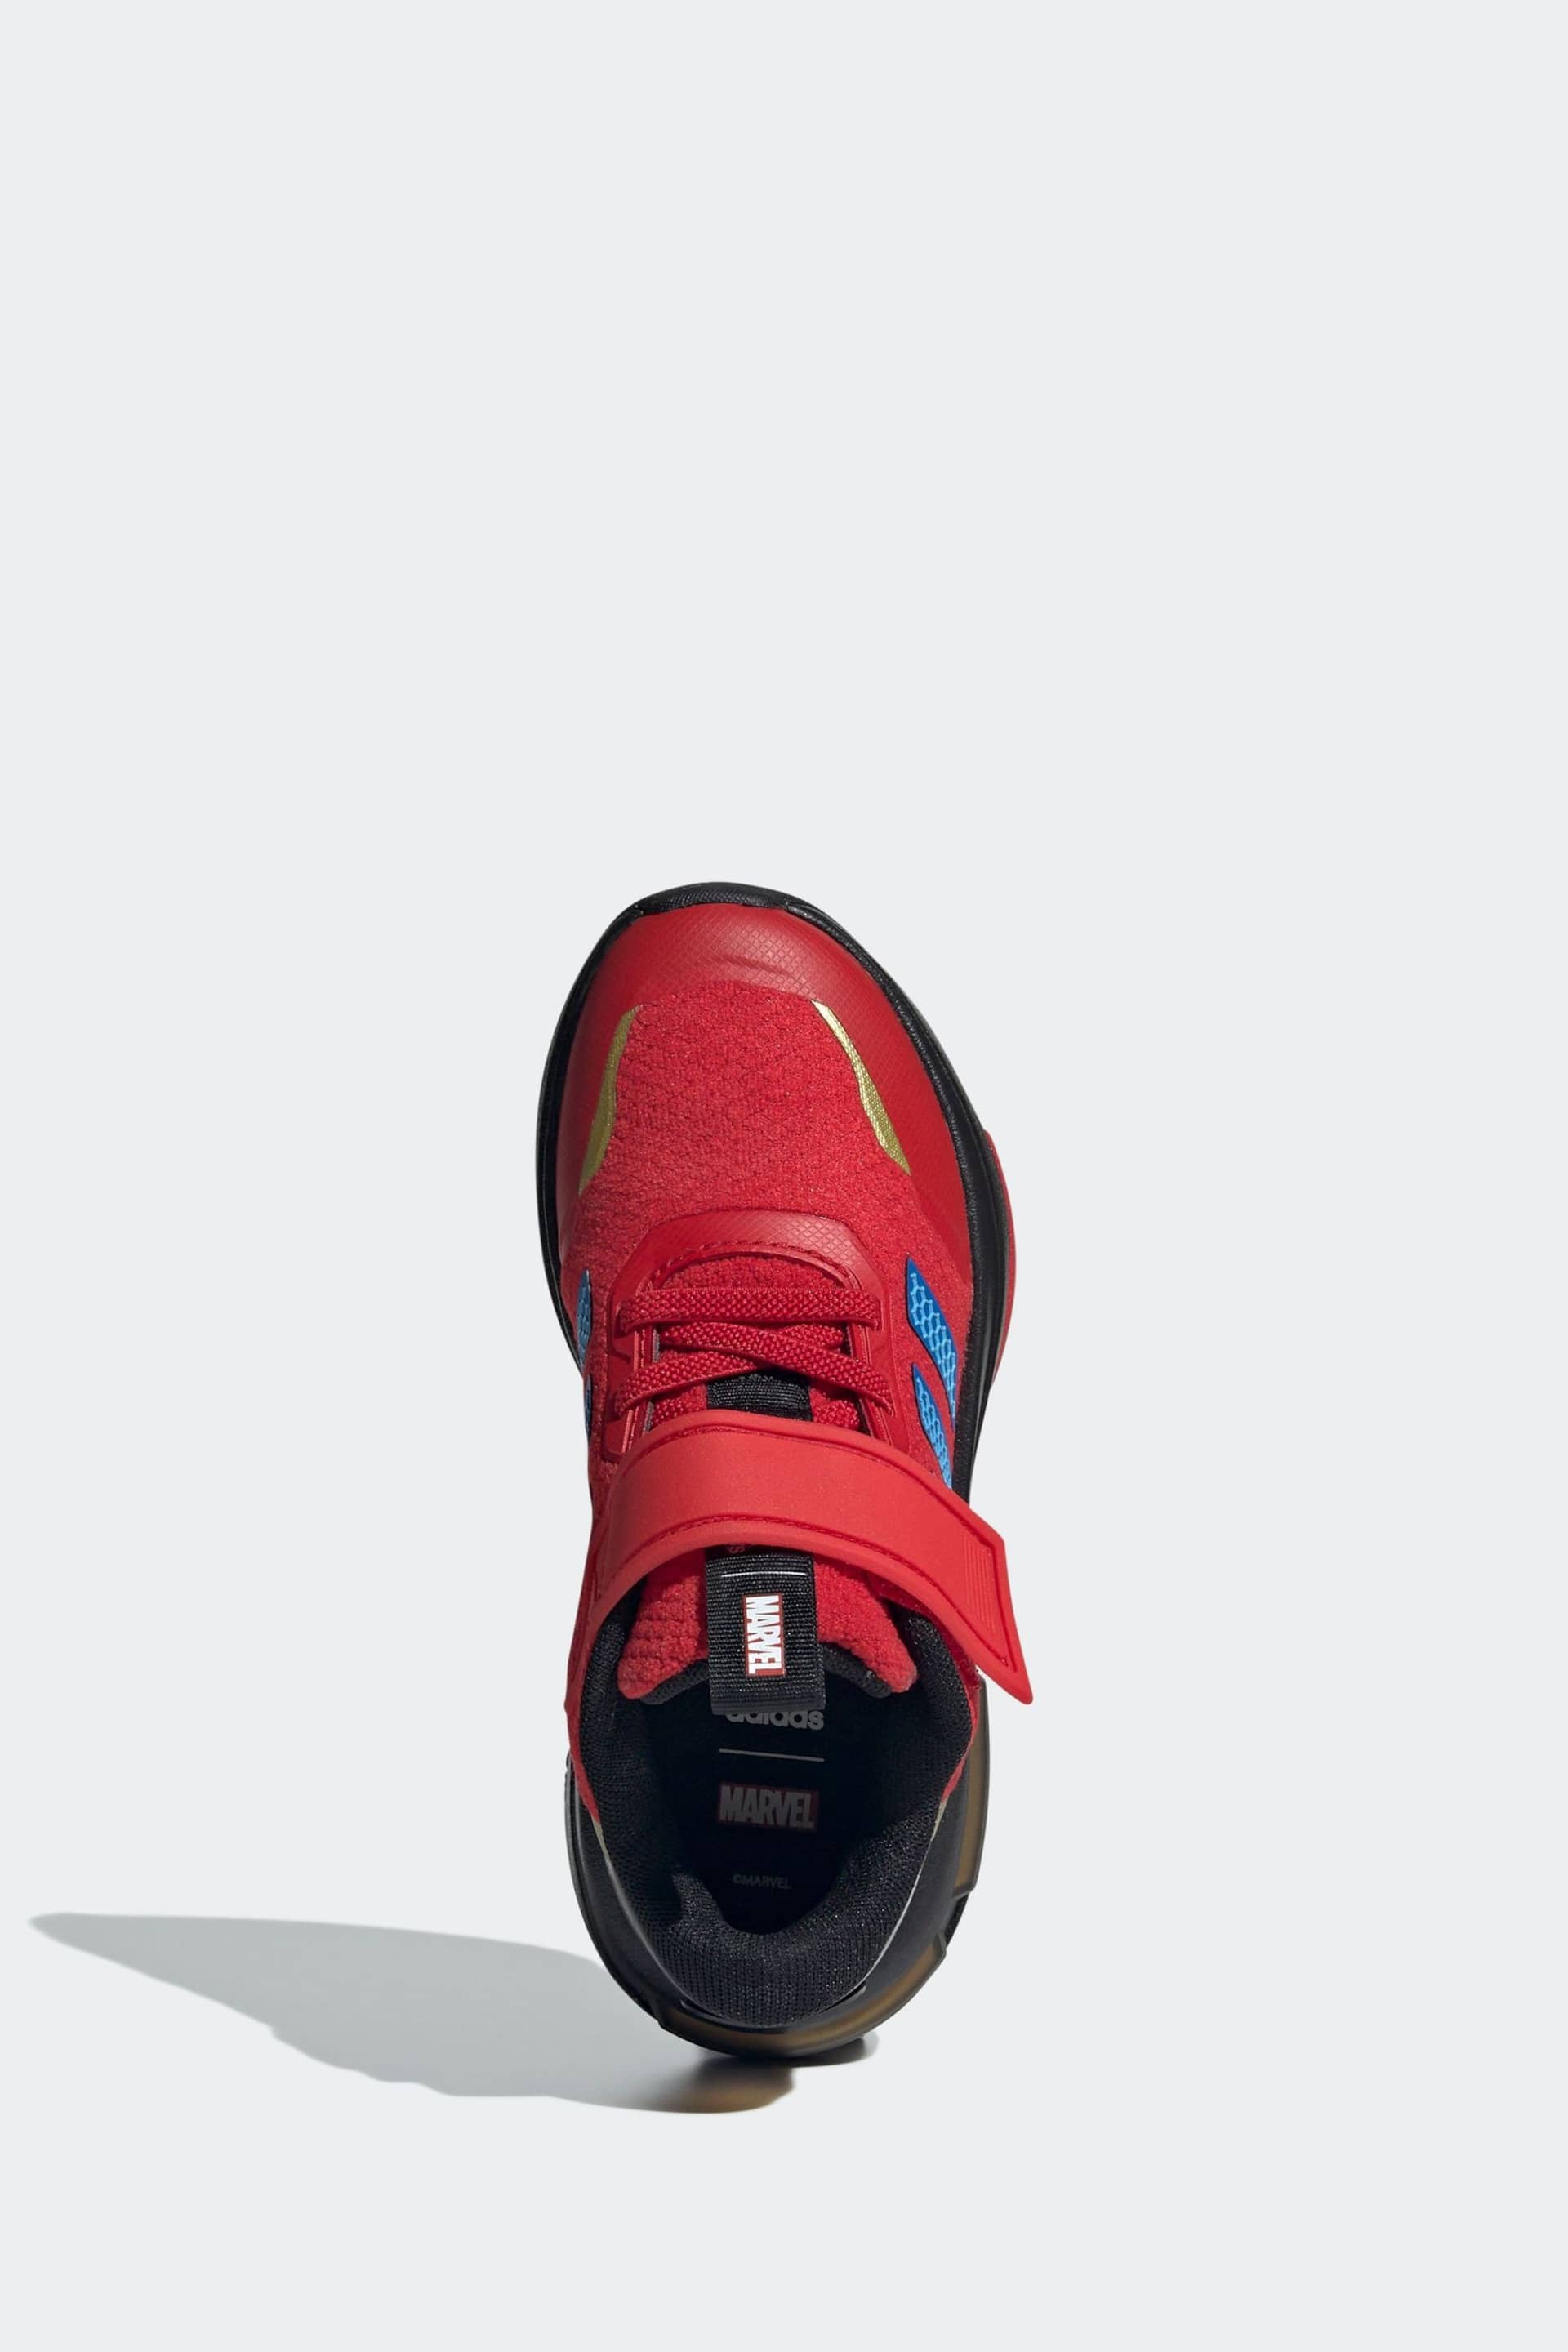 adidas Red Kids Marvel's Iron Man Racer Shoes - Image 6 of 9